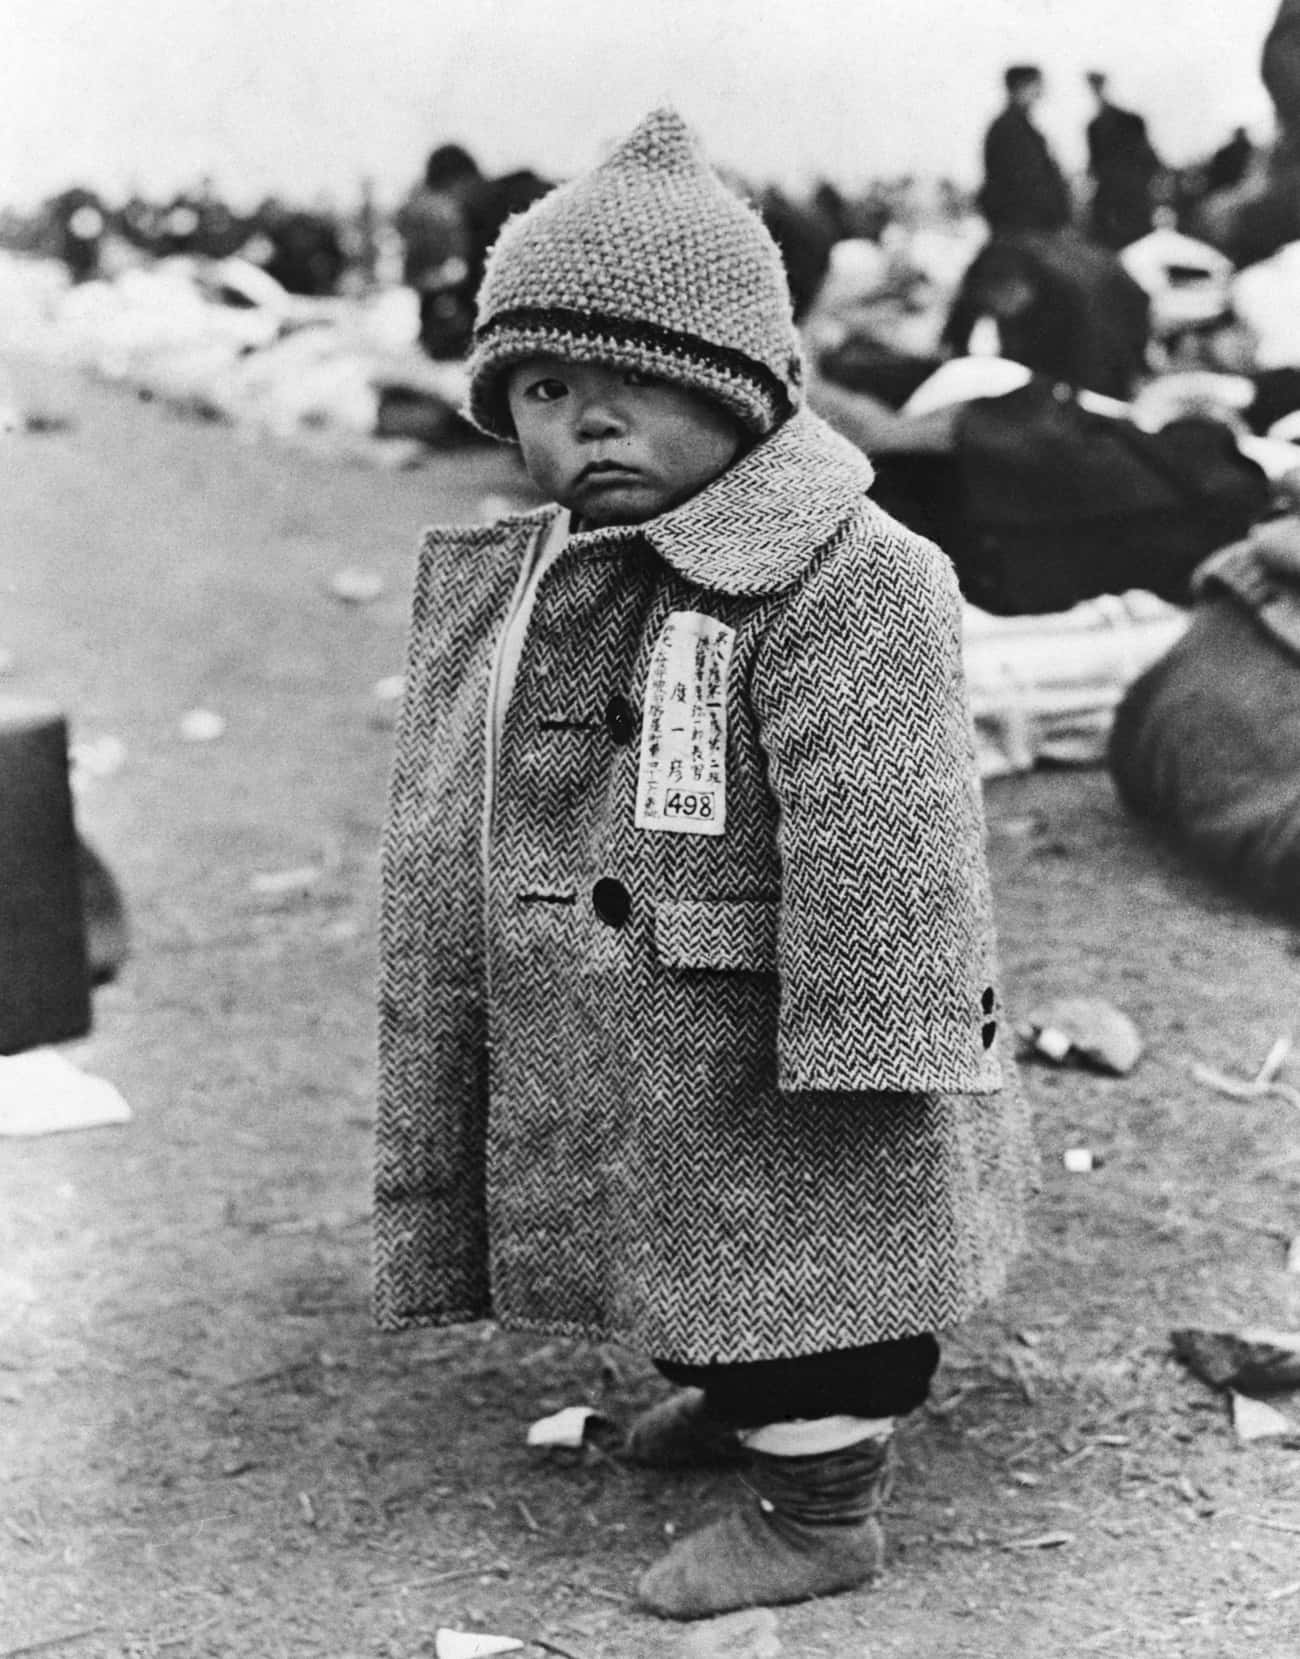 A Repatriated Child, August 30, 1946